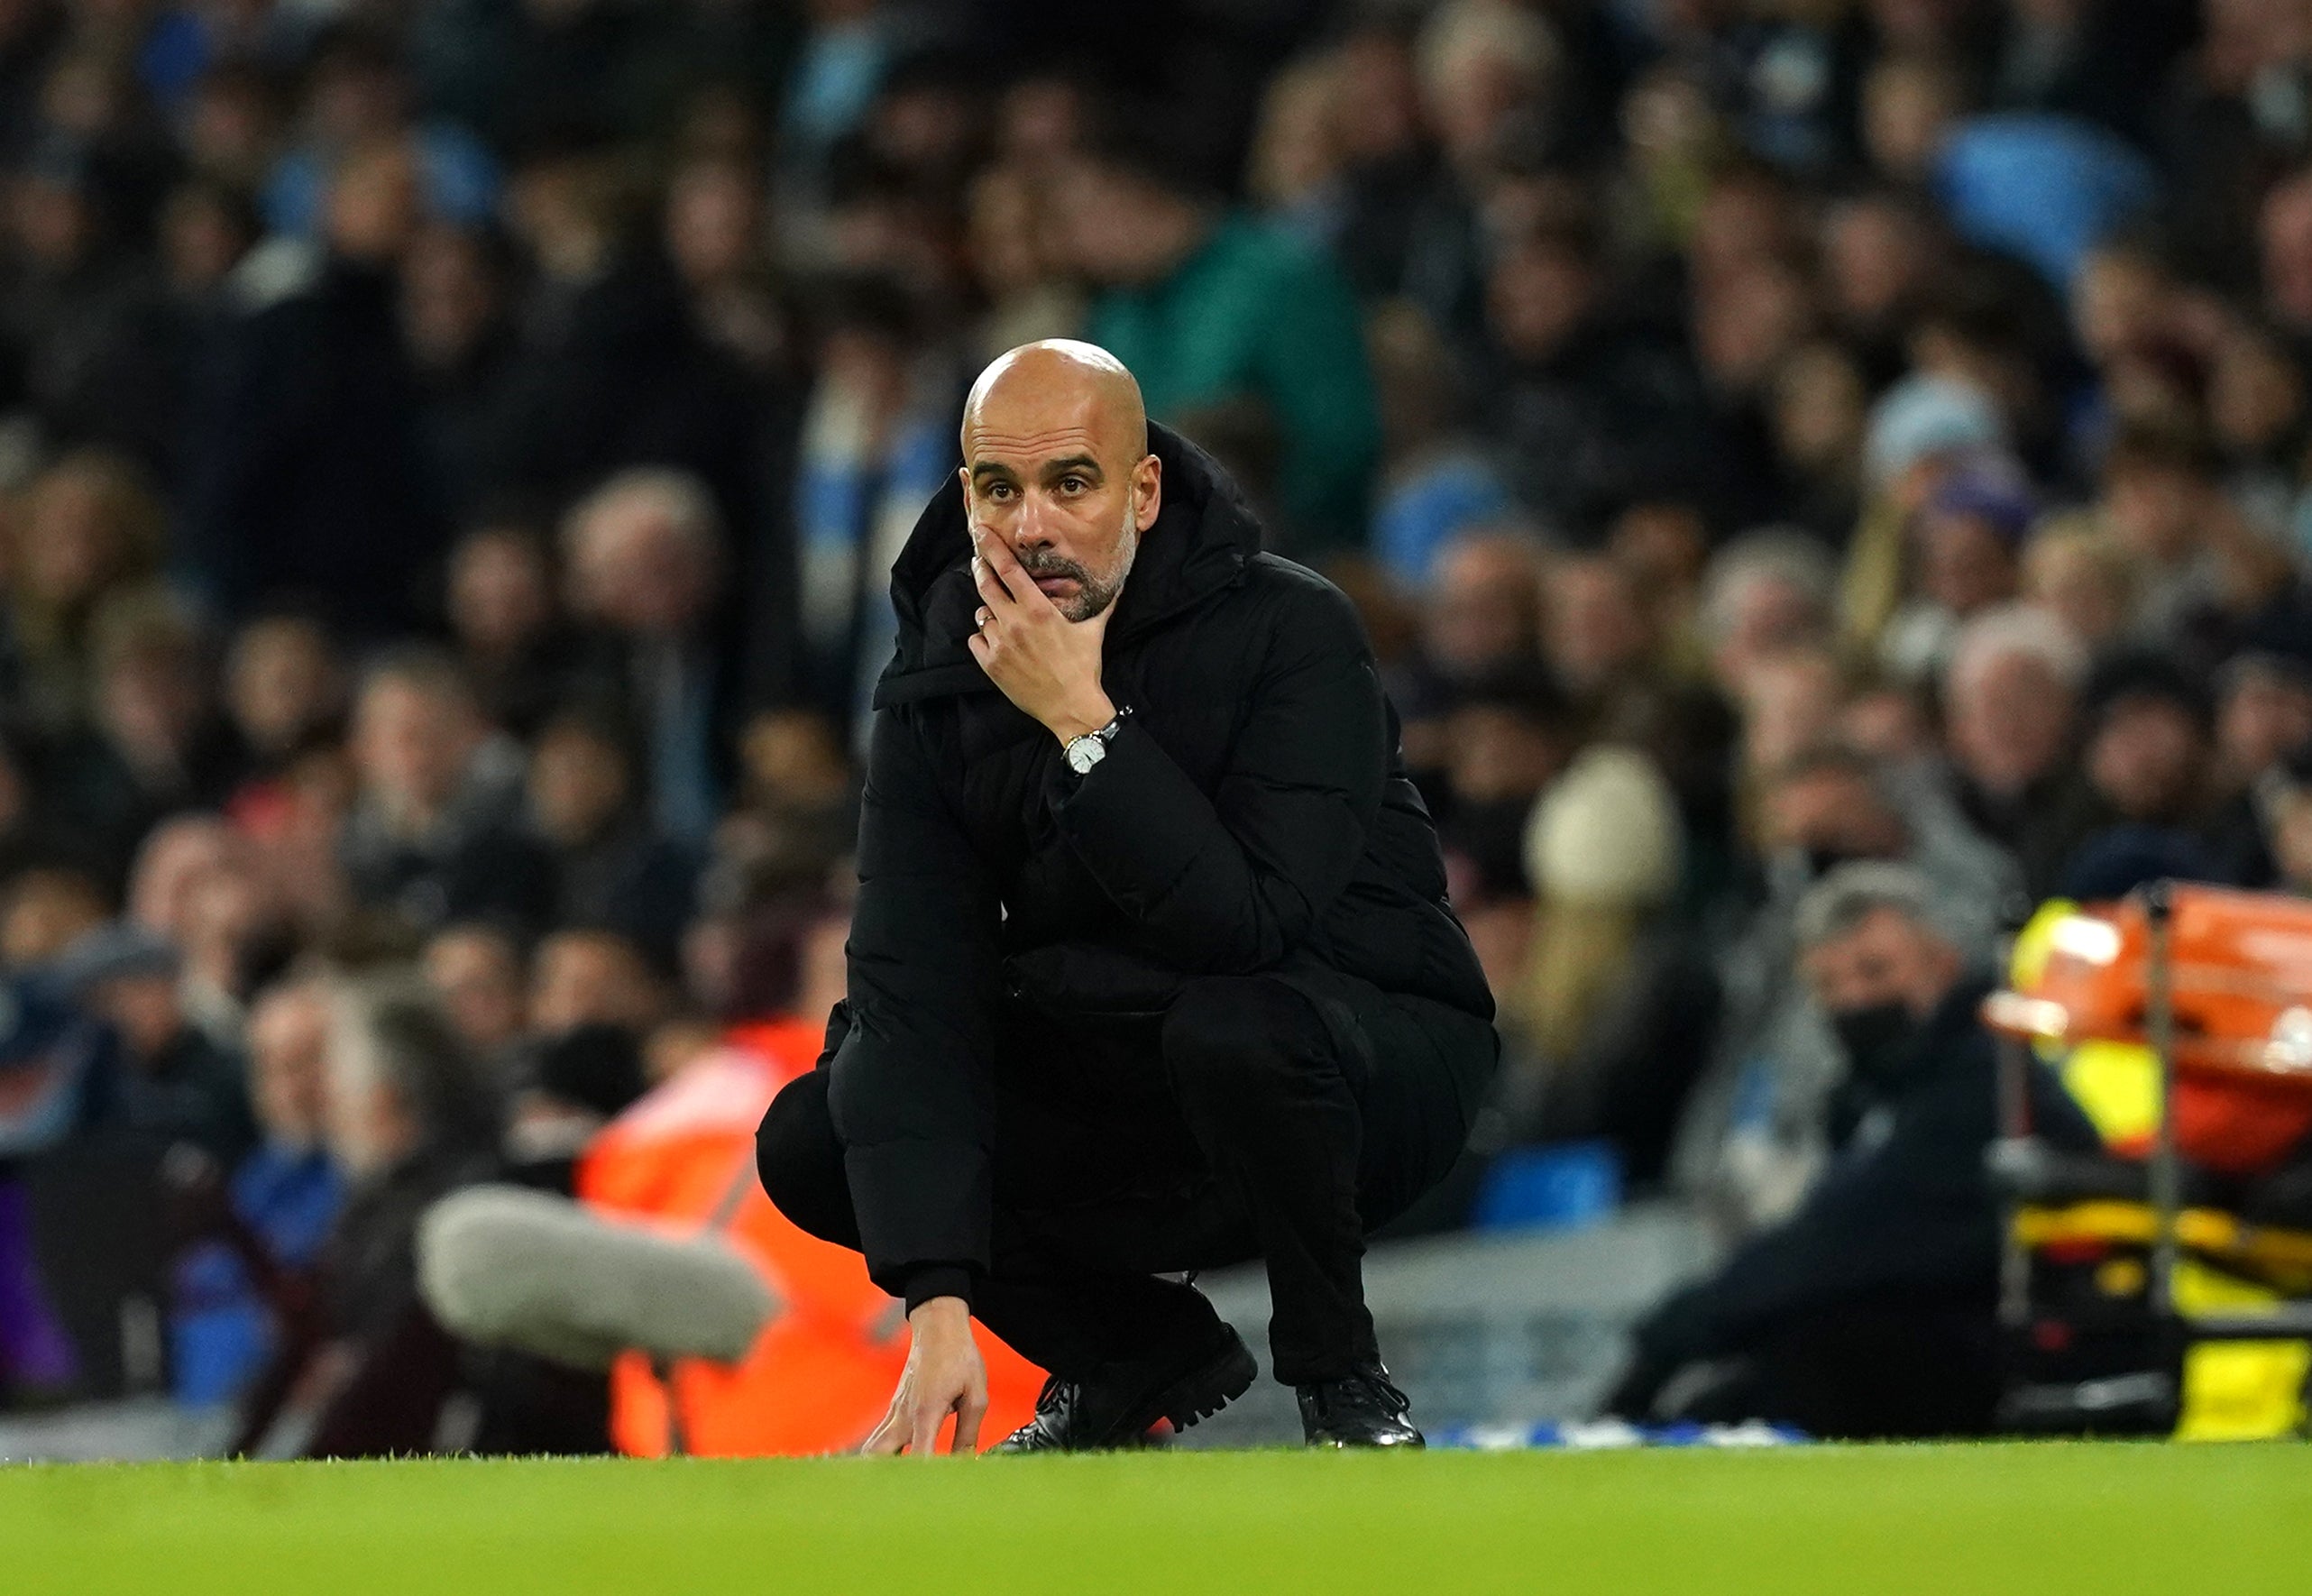 Pep Guardiola is looking for an 11th straight win at Arsenal (Martin Rickett/PA)